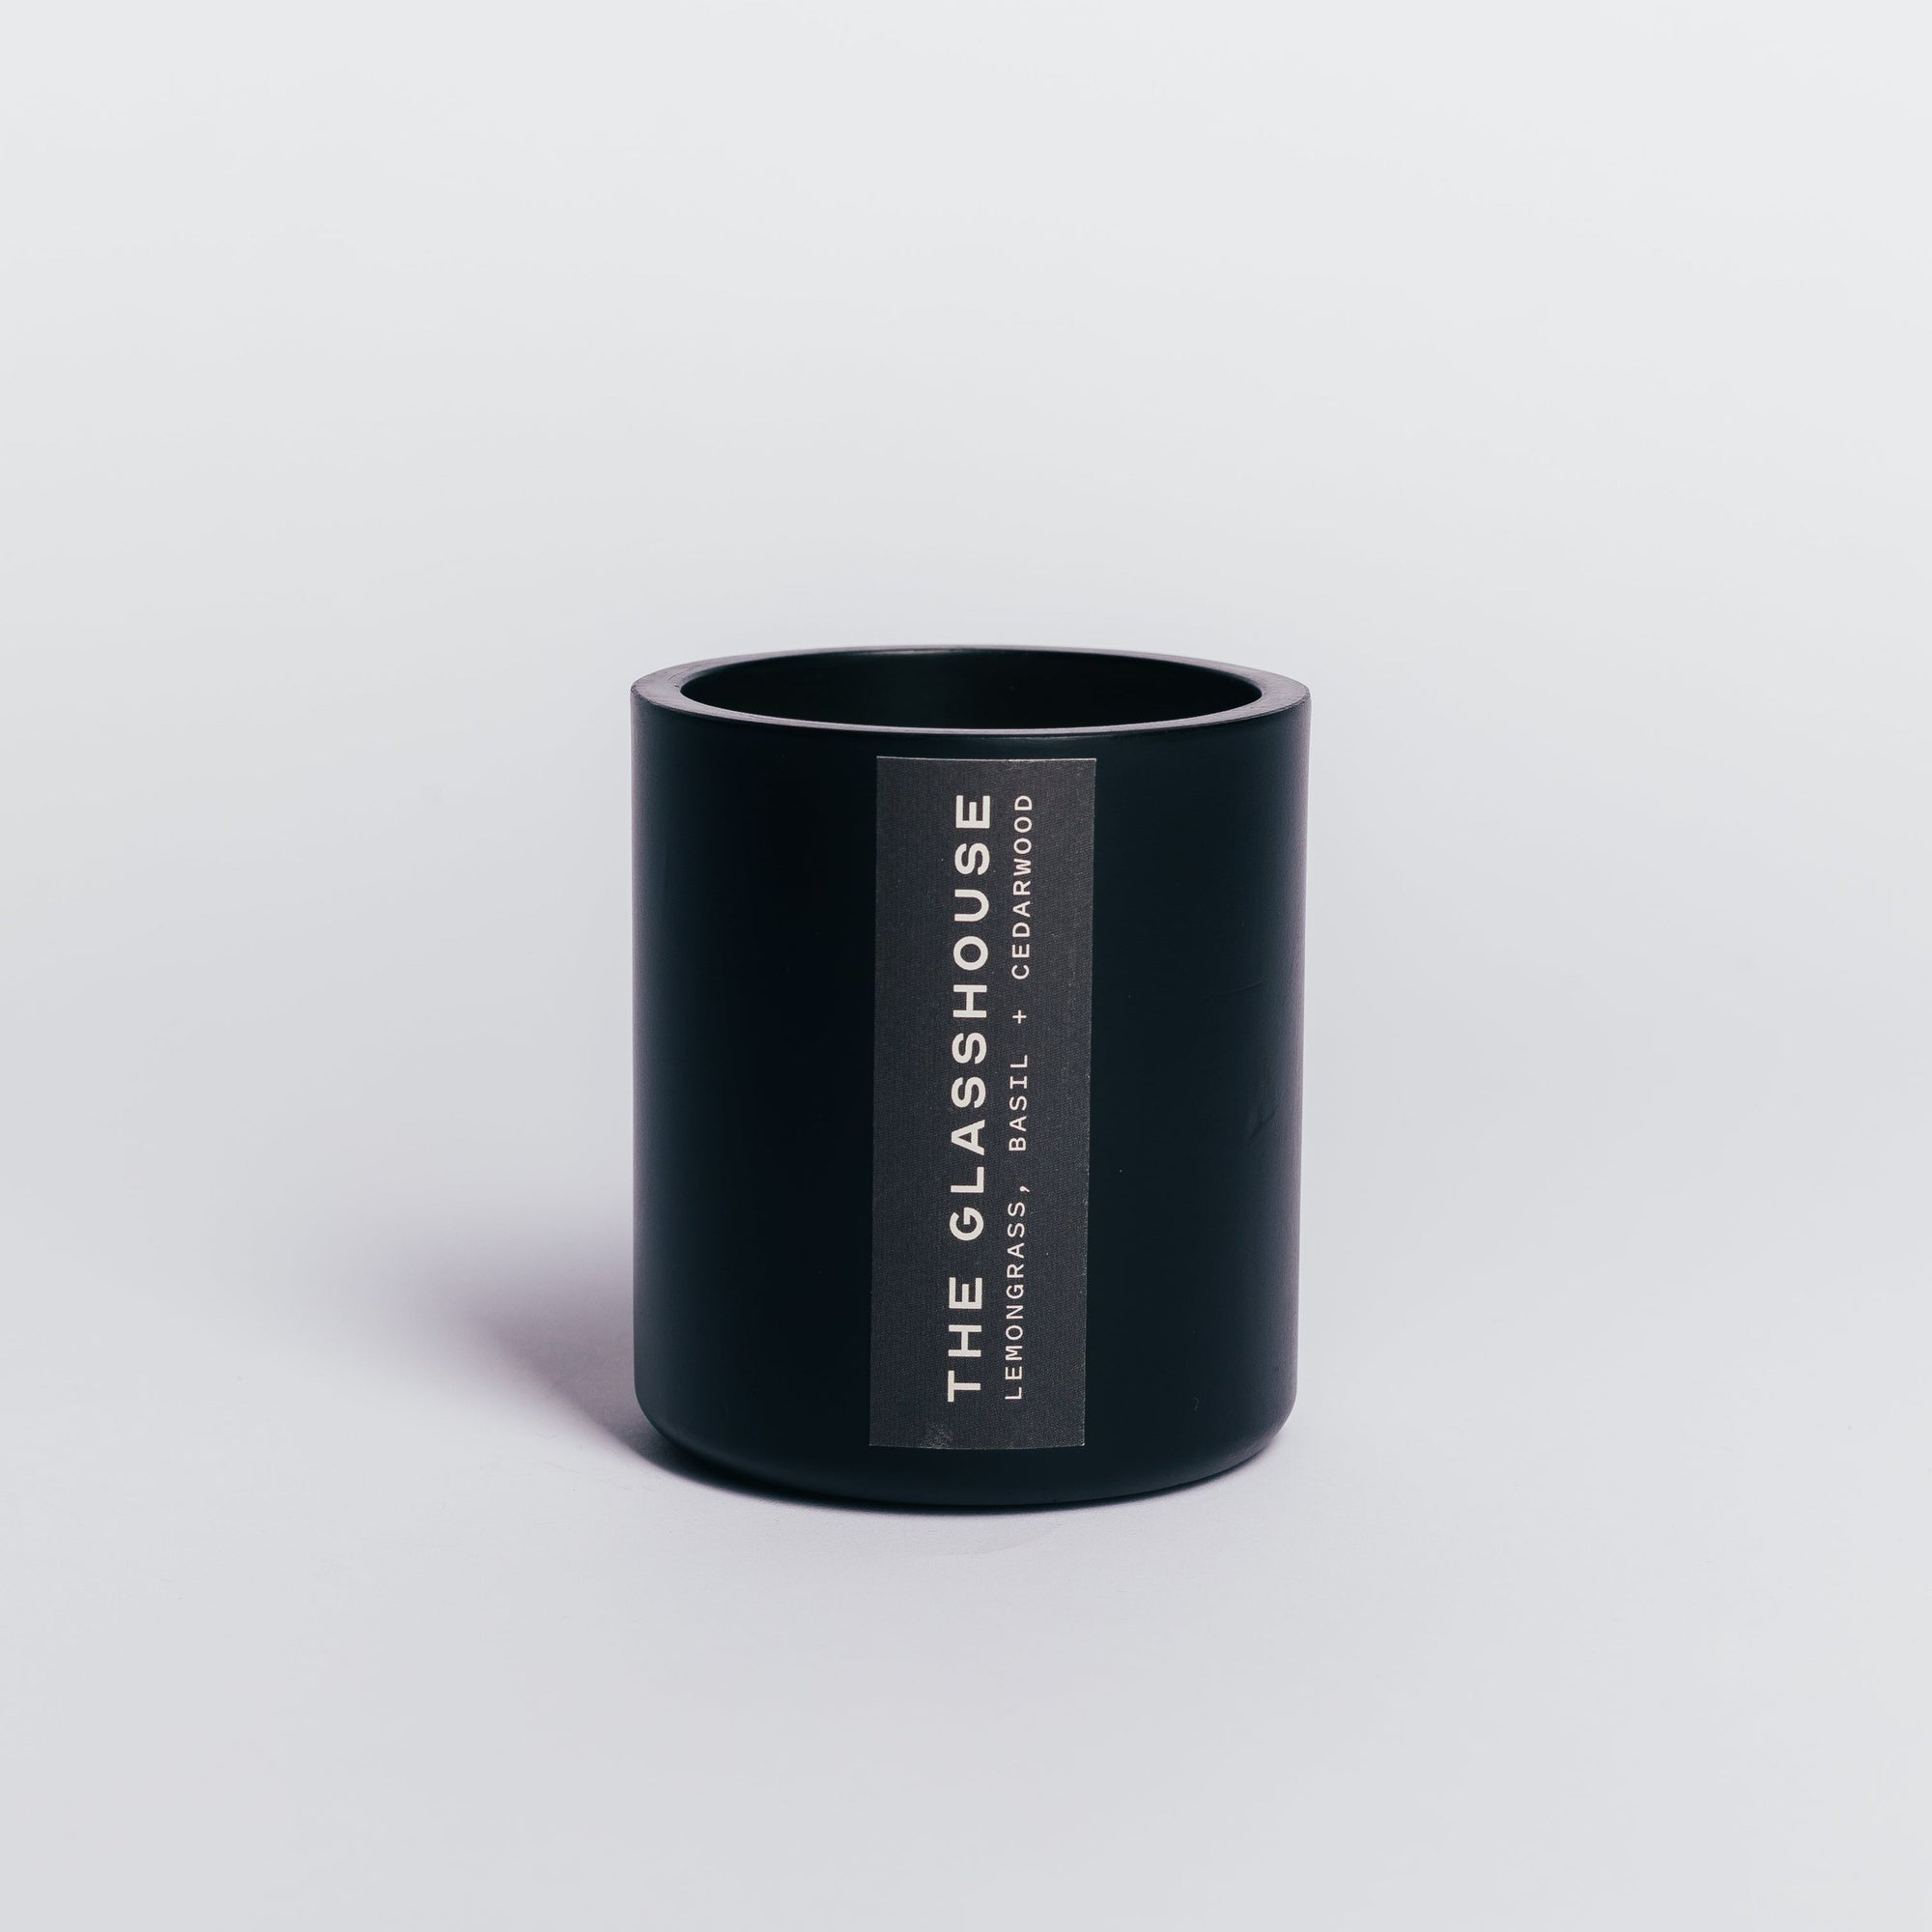 AGWA x TIME • RONE x Aromatherapy Lab Candle - The Glasshouse